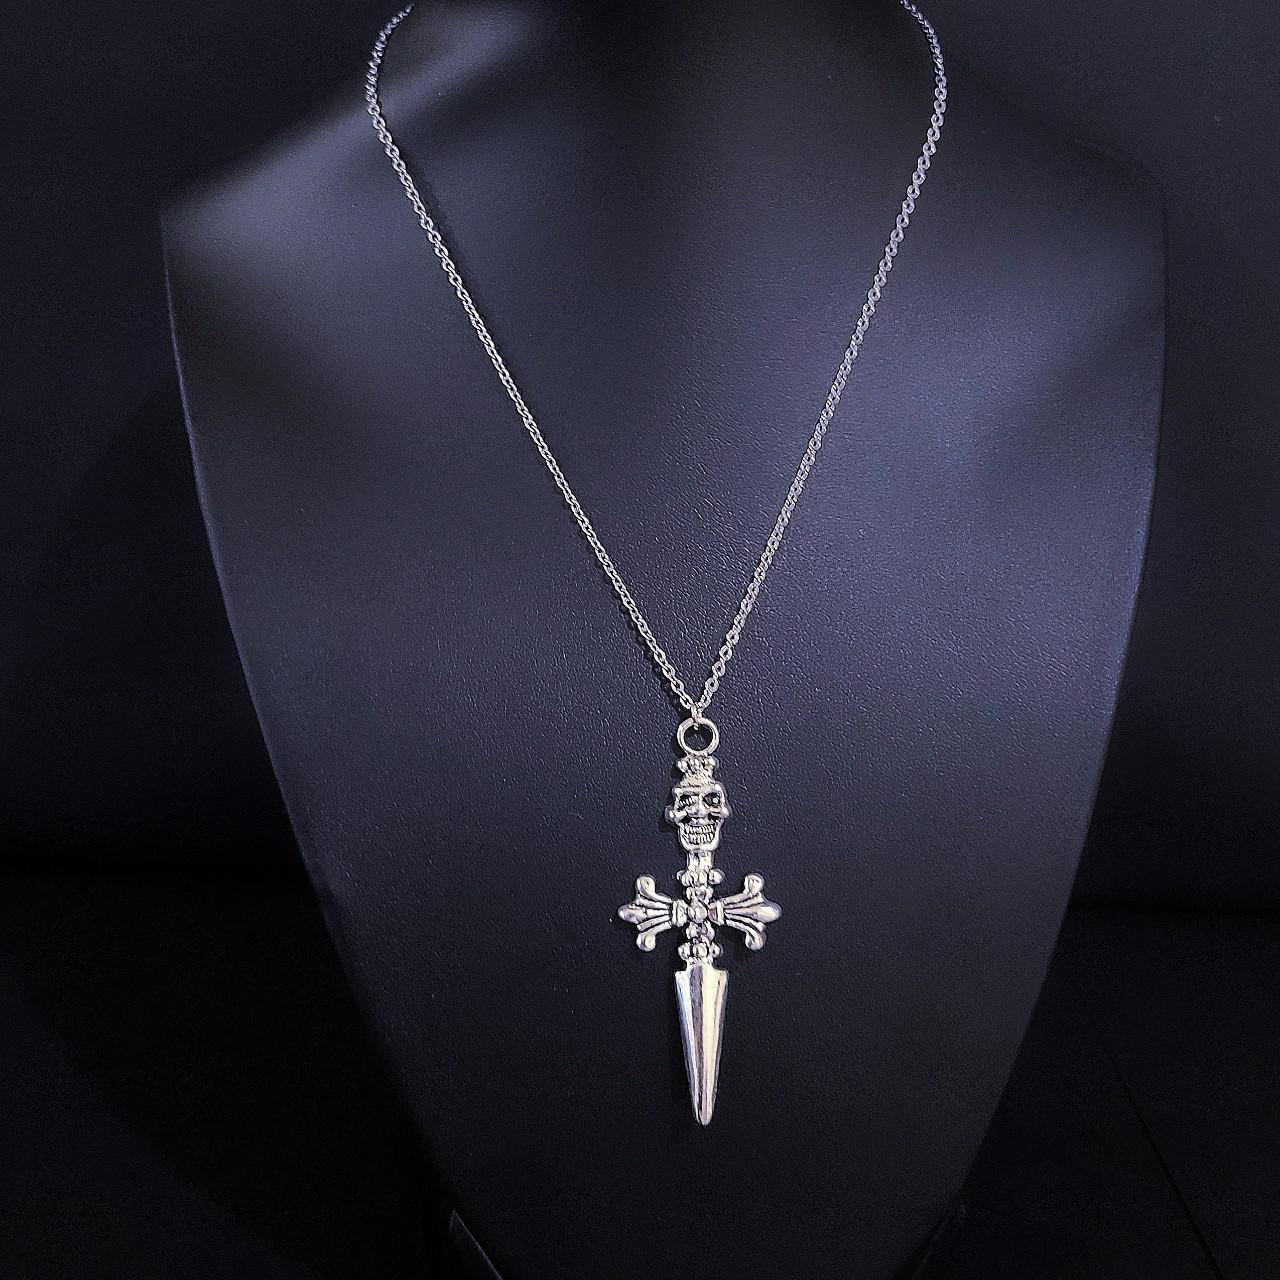 Product Image 2 - 18" Skull Sword Necklace 001

Stainless